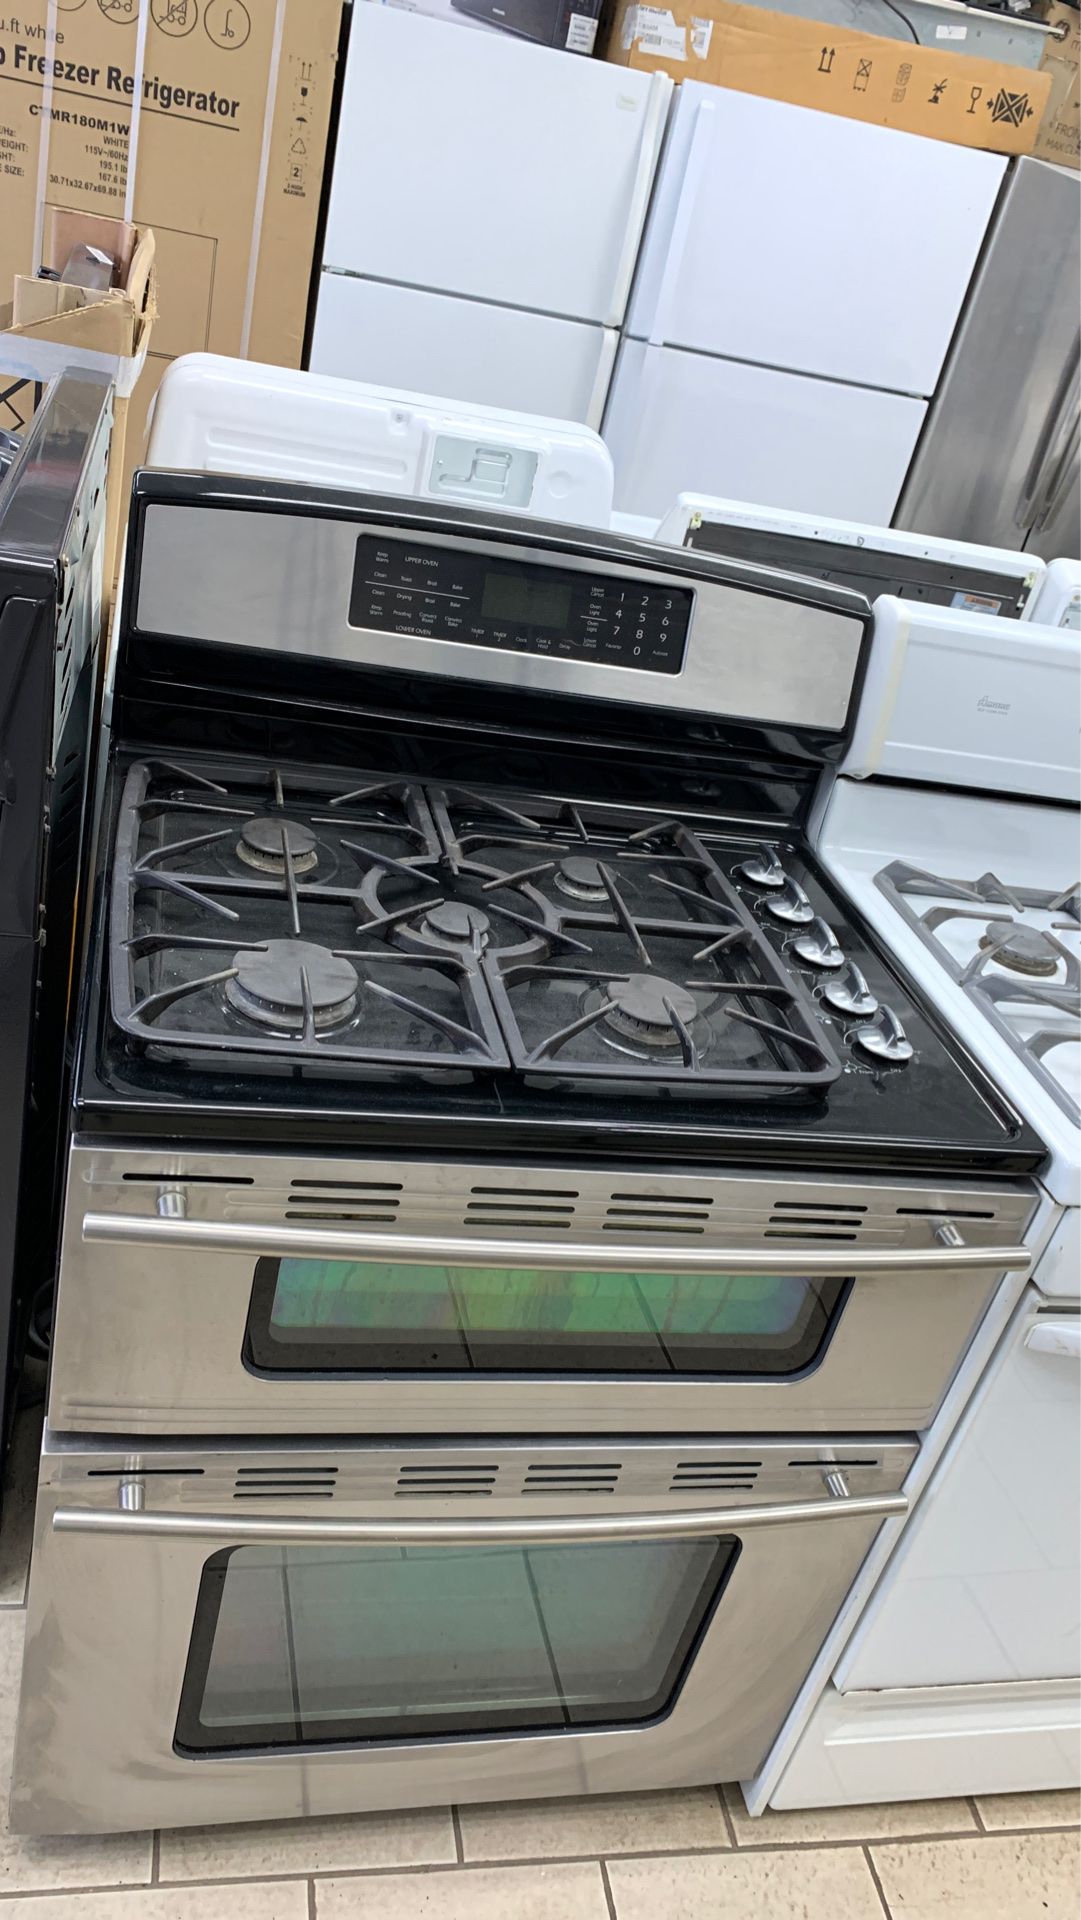 Jenn Air double oven stainless steel stove gas burners electric ovens